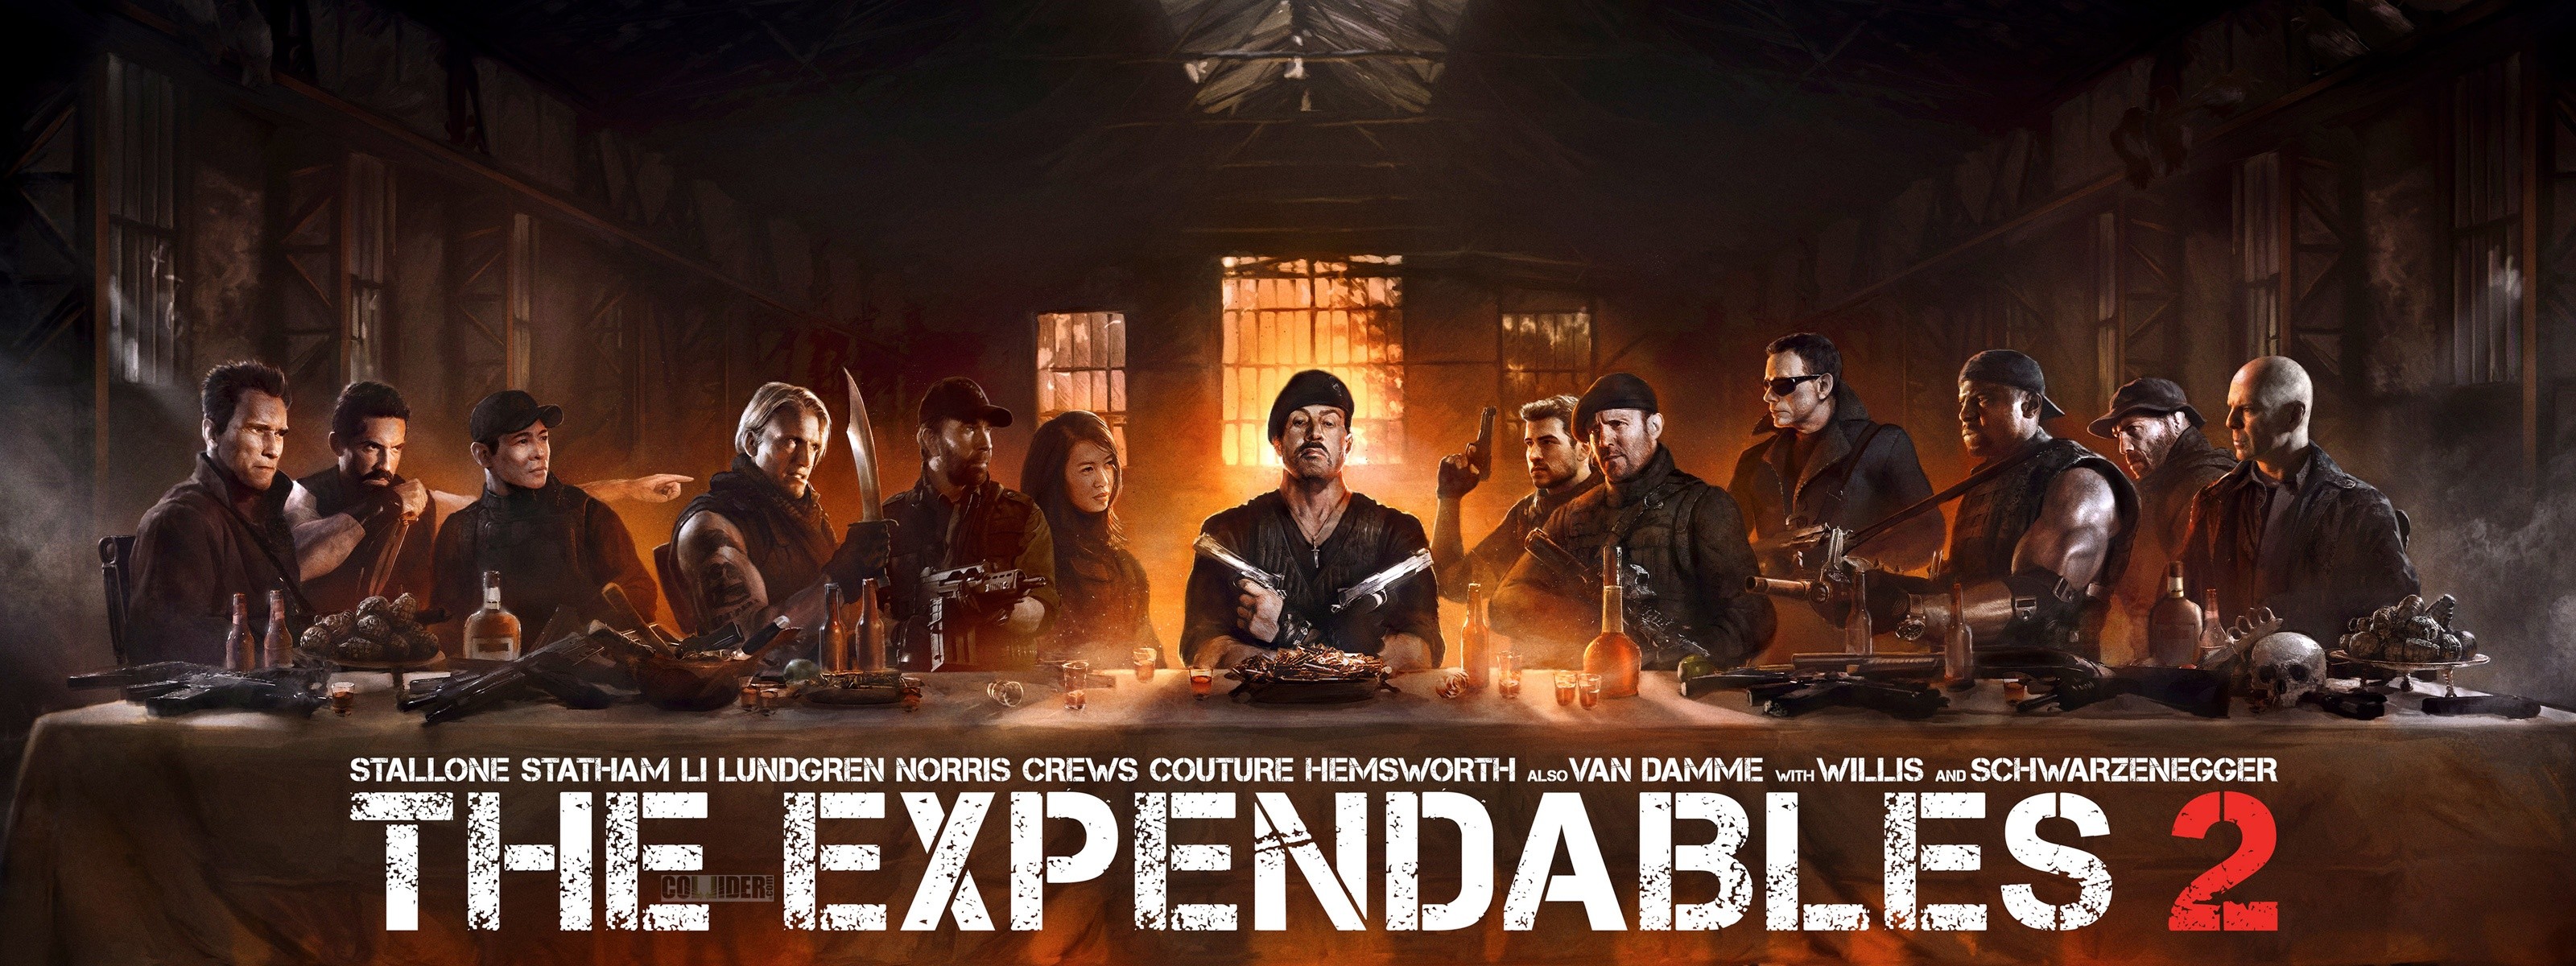 3200x1200 Expendables 2 The Last Supper Wallpapers